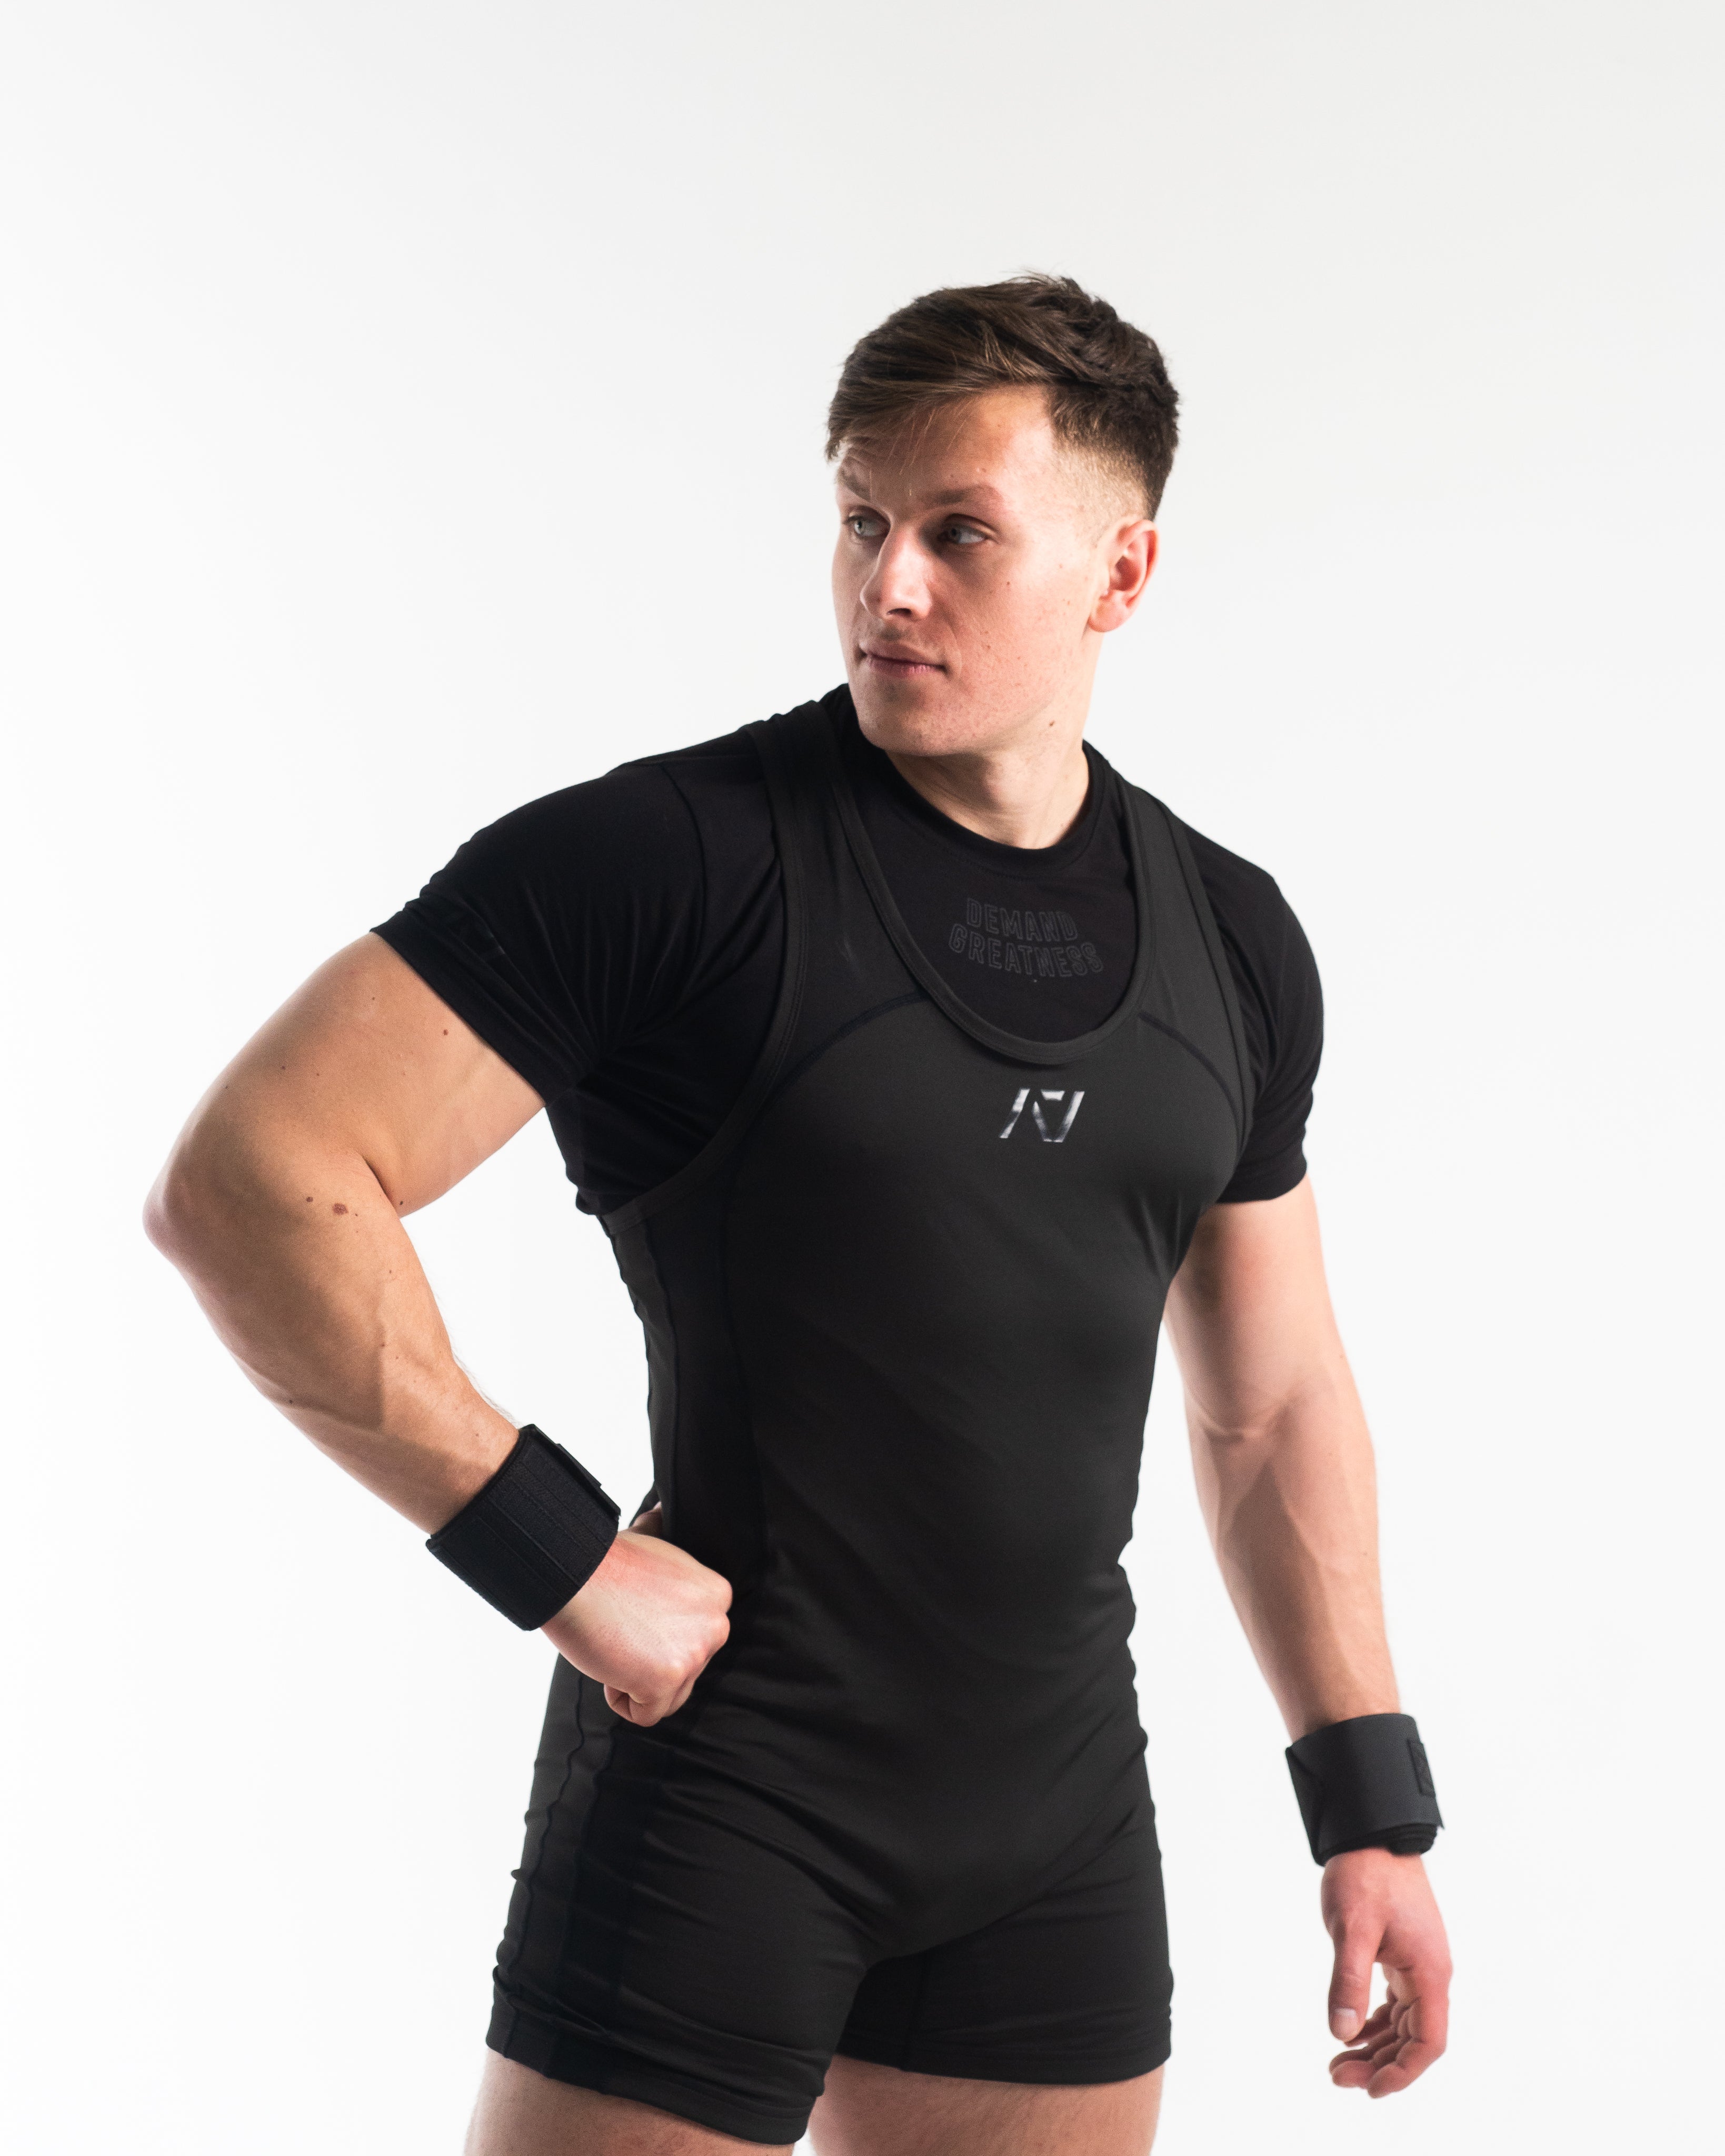 Hourglass Knee Sleeves   Stealth   A7 UK shipping to Europe